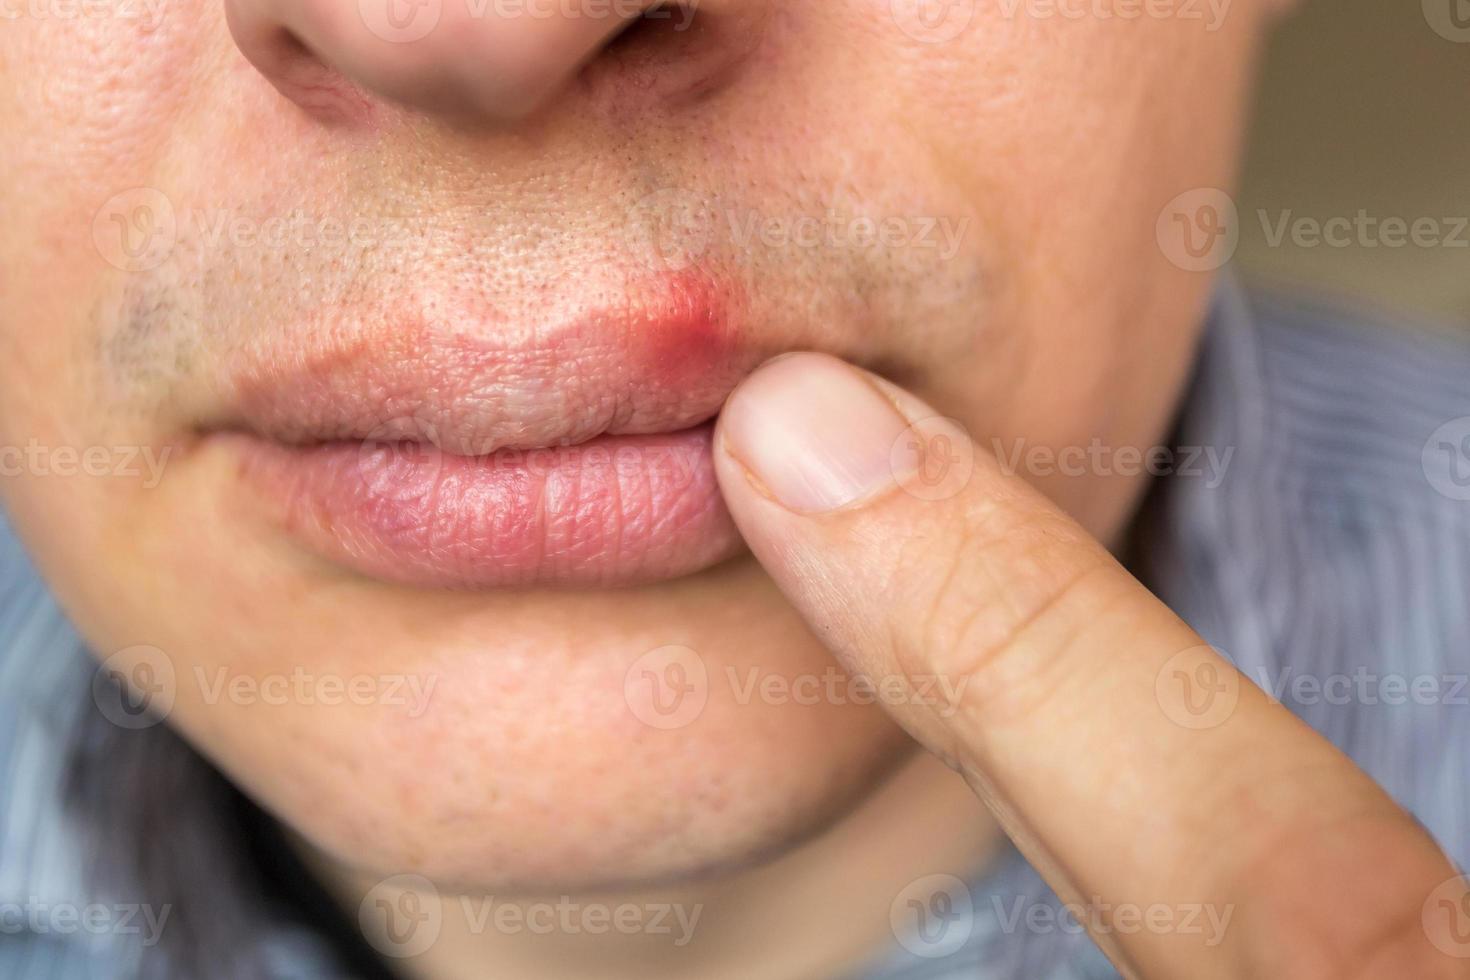 red inflammation and herpes zoster virus on upper male lip photo